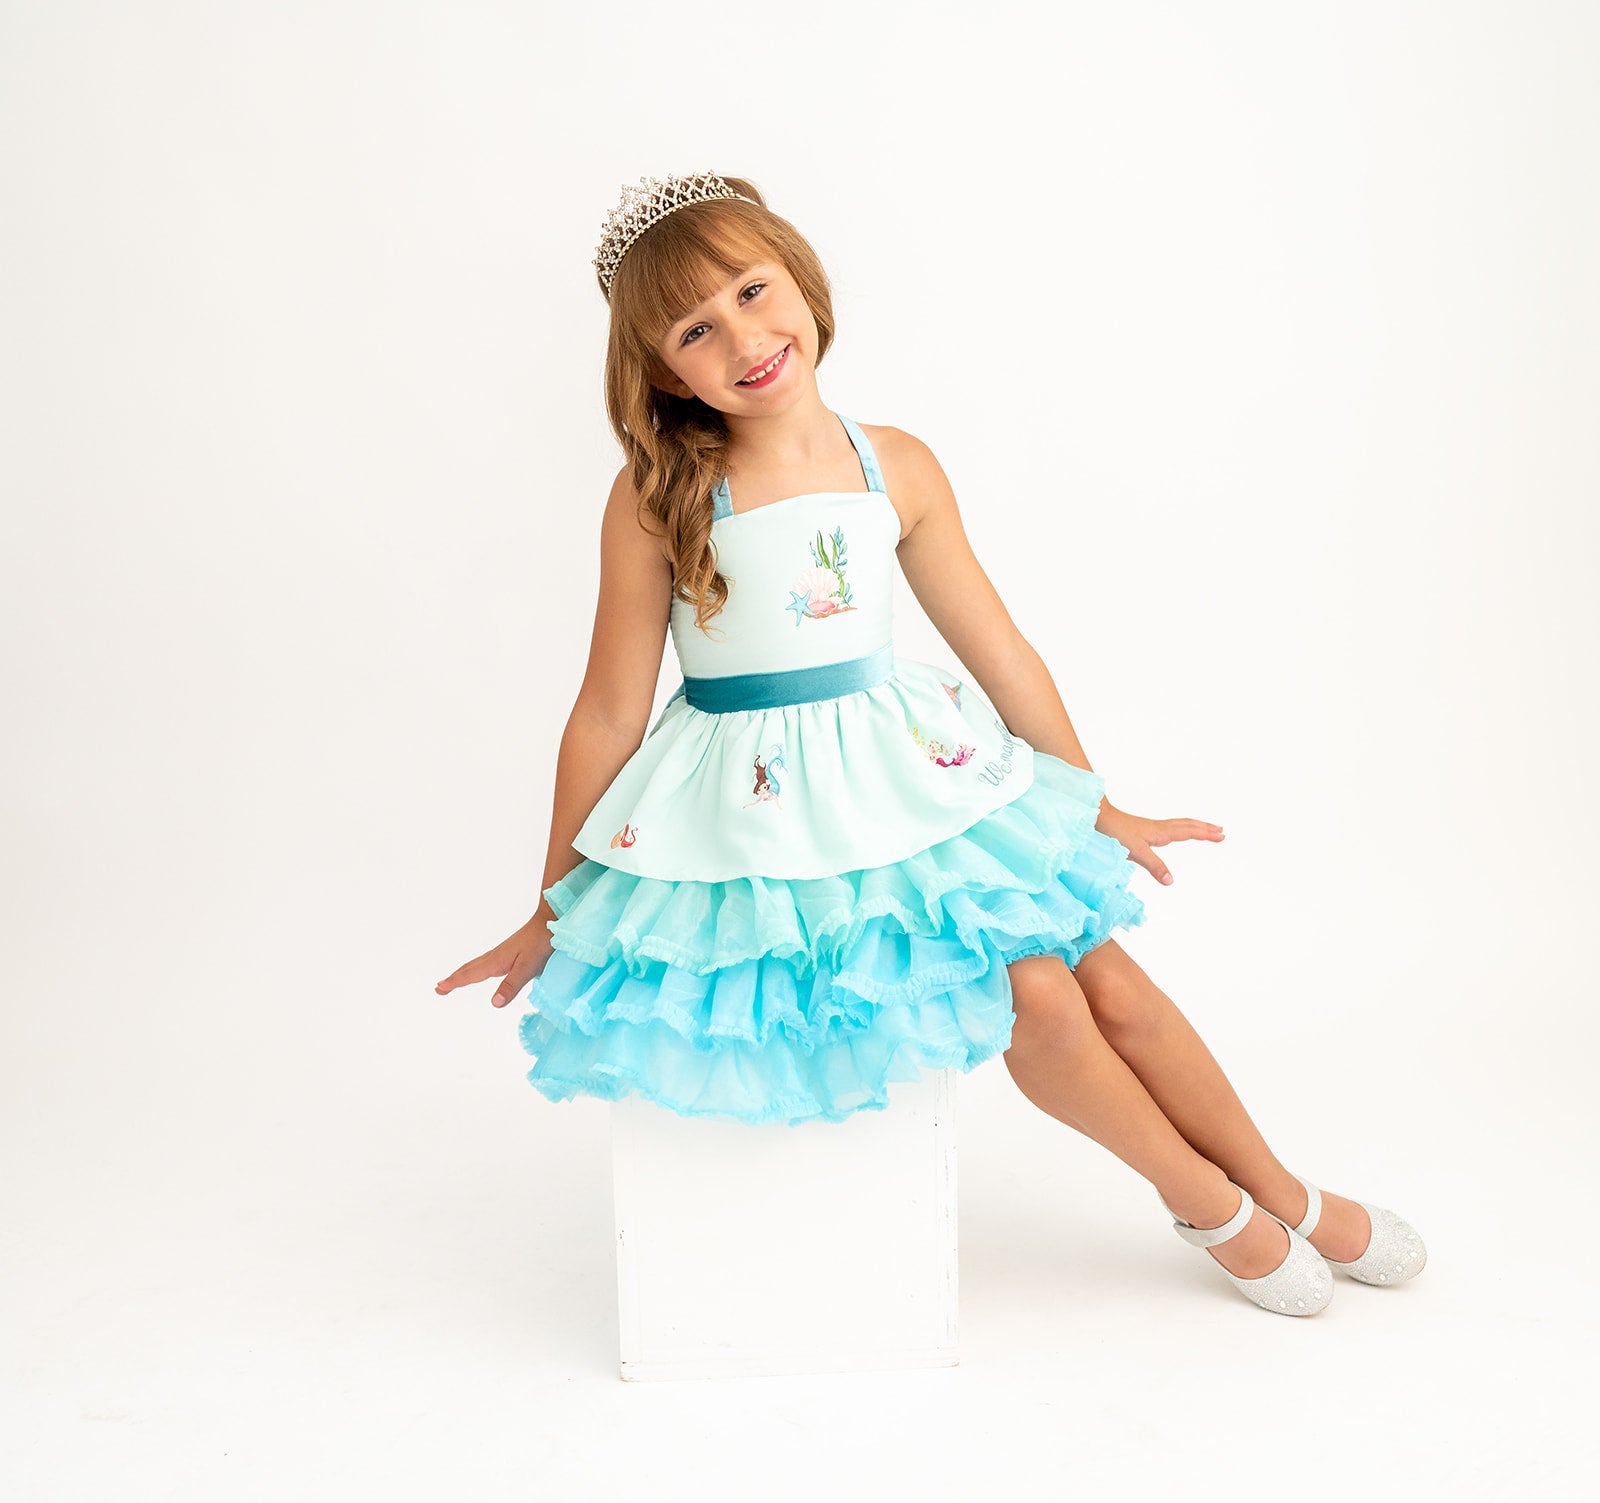 More Magical Together Aqua and Teal Ombré Ruffled Quote Dress - Evie's Closet Clothing